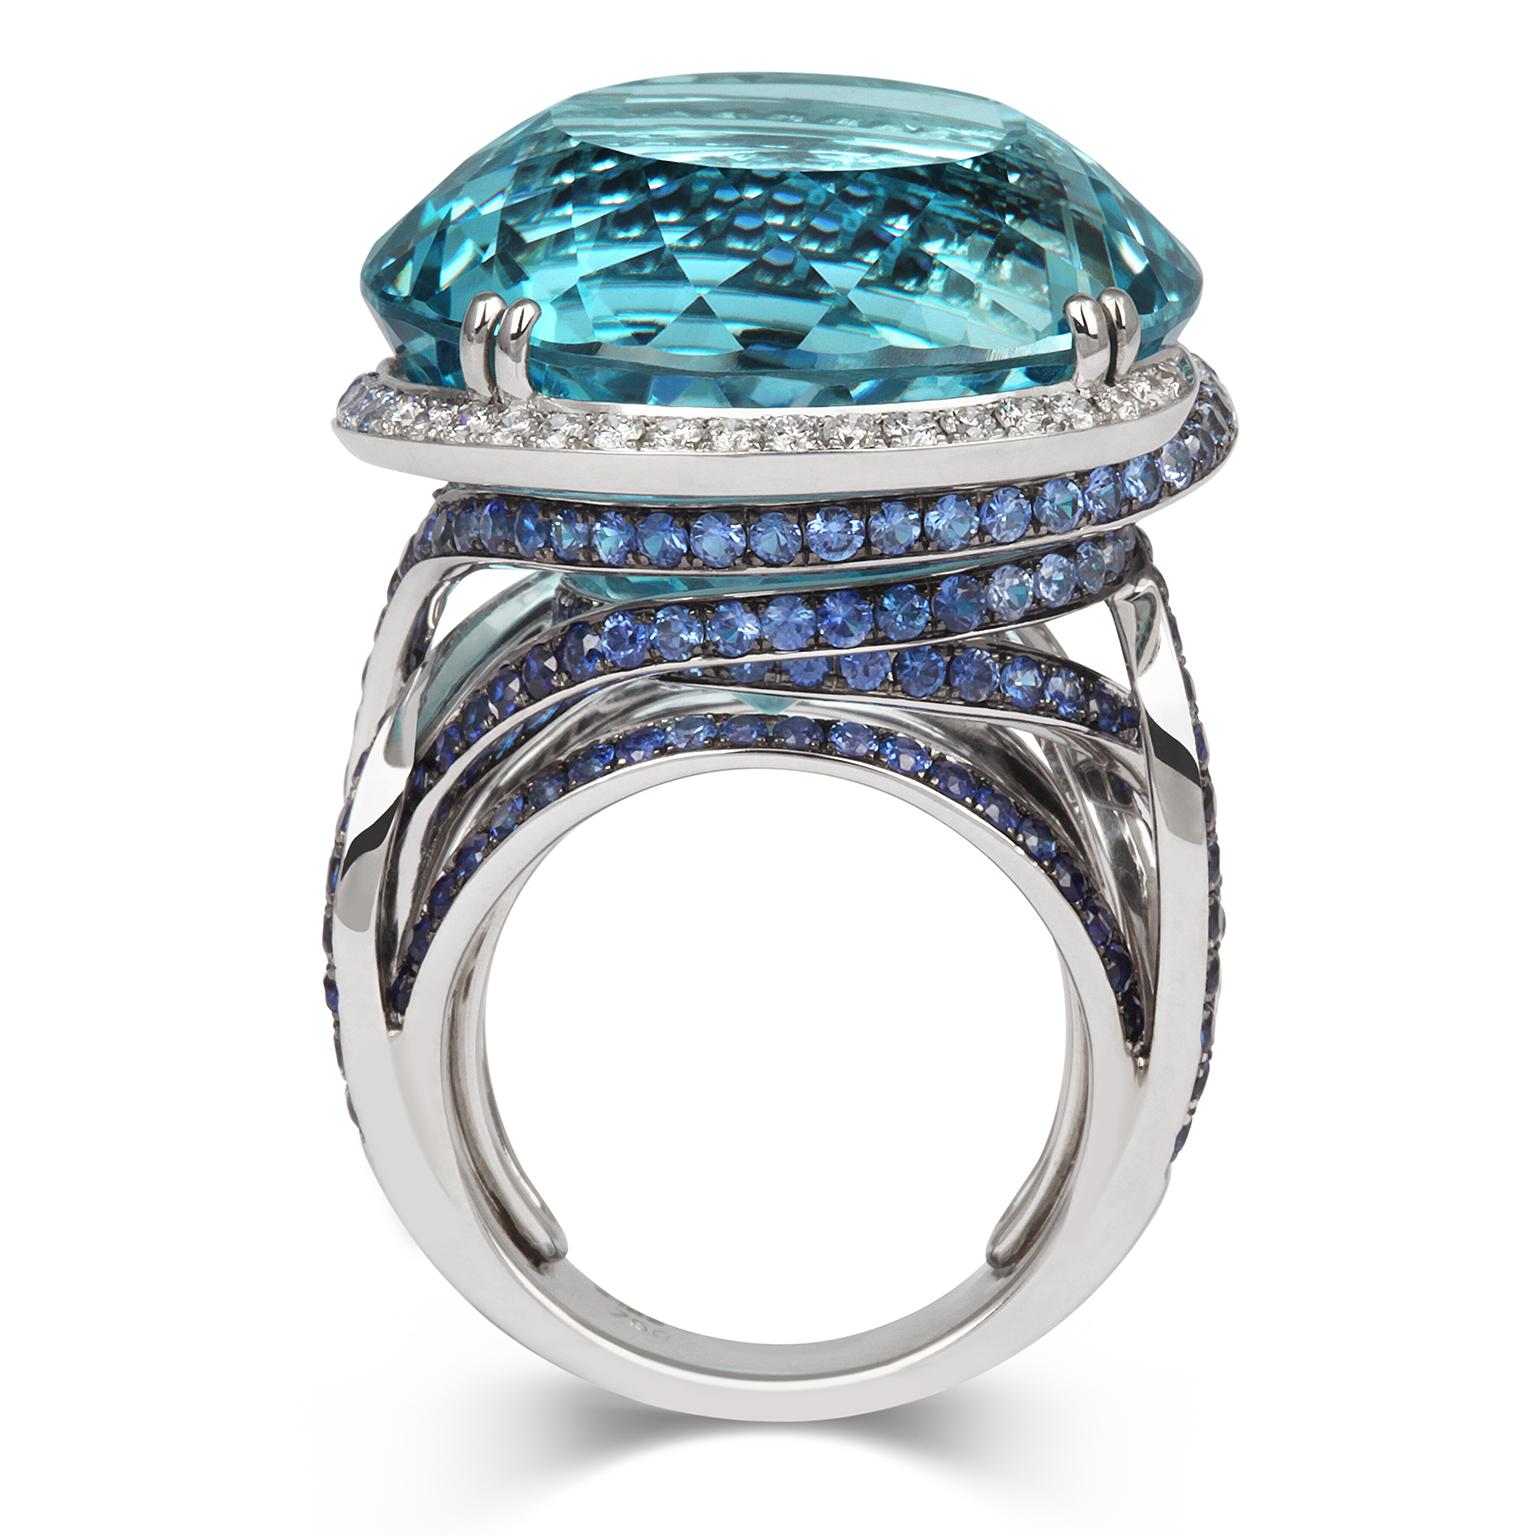 'THE OCEAN BLUE' - When sailing and yachting is your passion, this grand gala cocktail ring is the quintessential must-have creation to elevate the experience. It has been crafted in 18ct White Gold and set with almost half a carat of fine